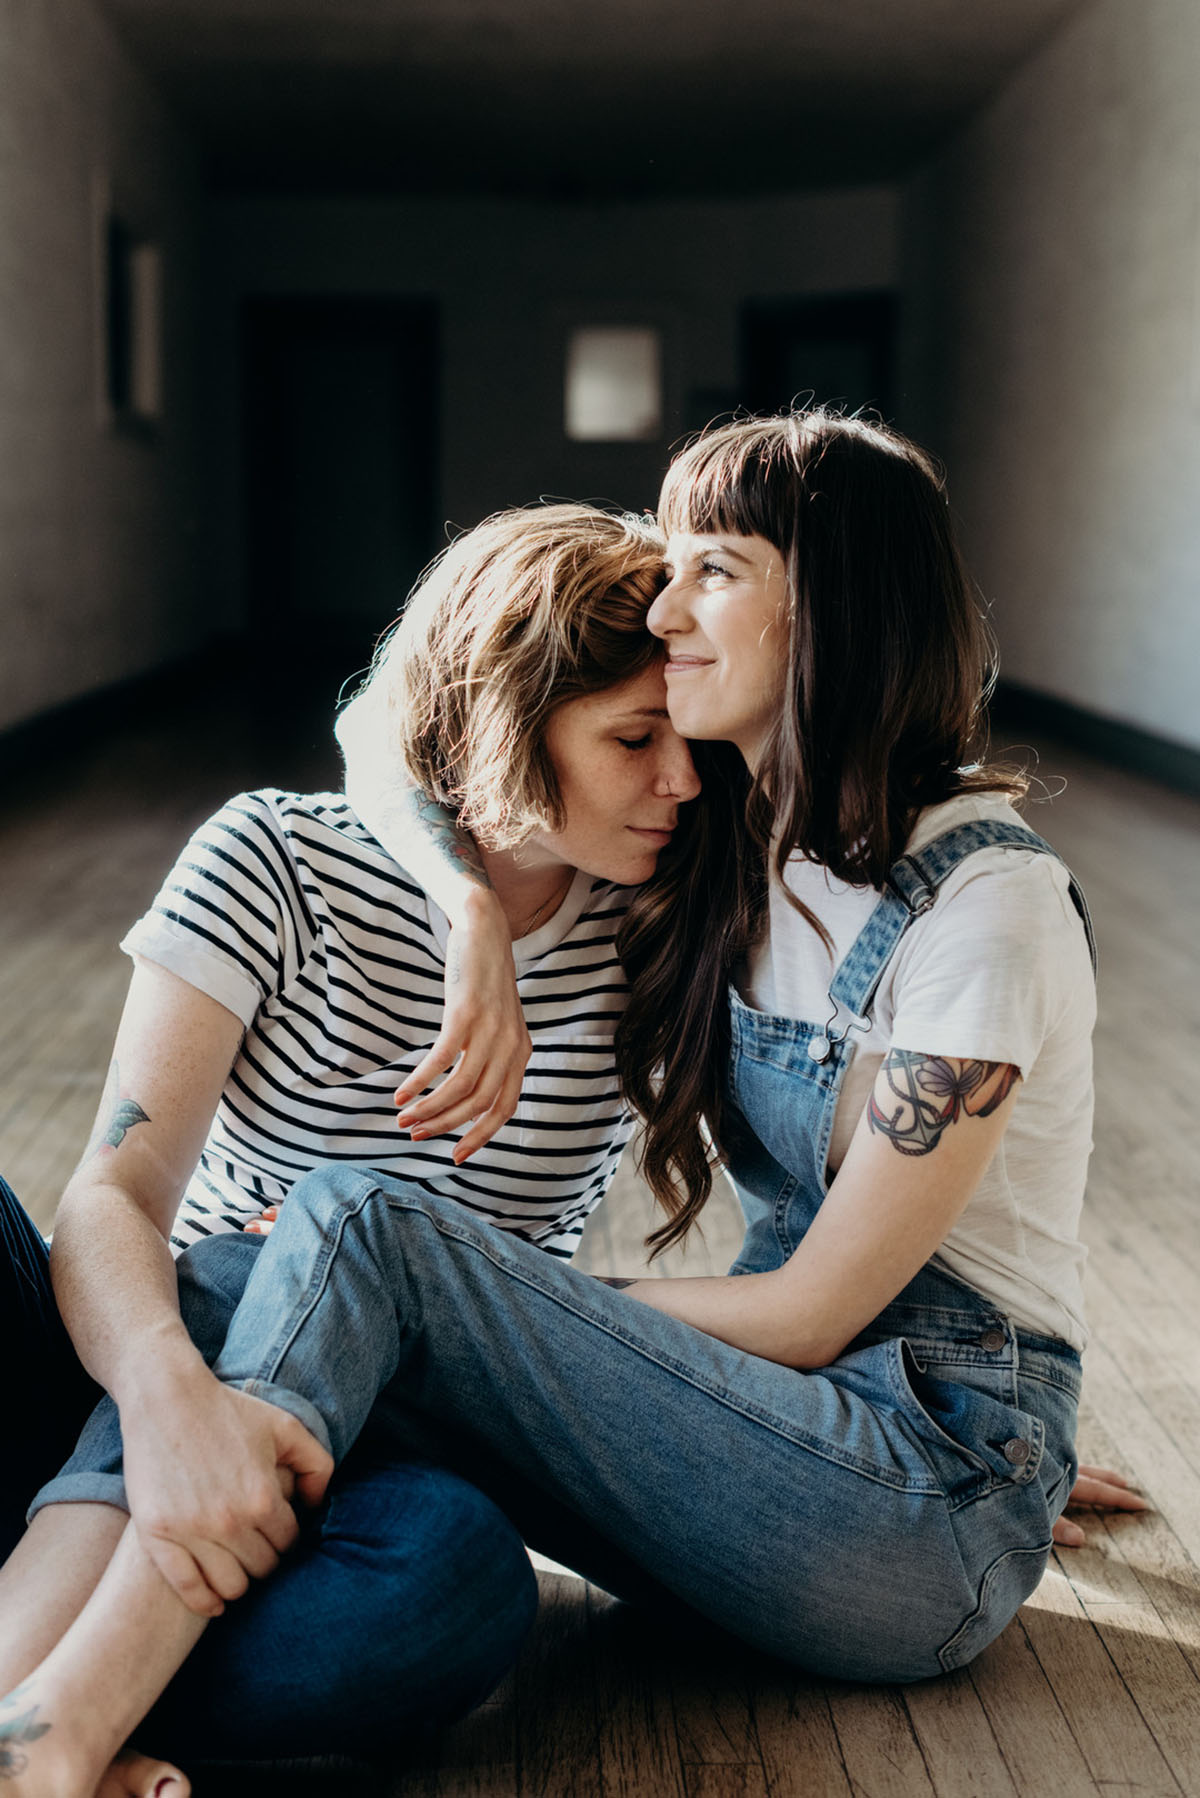 Home engagement photos with cats in San Diego, California two brides lesbian couple overalls plants rooftop garden tabby tuxedo cat tattoos intimate casual